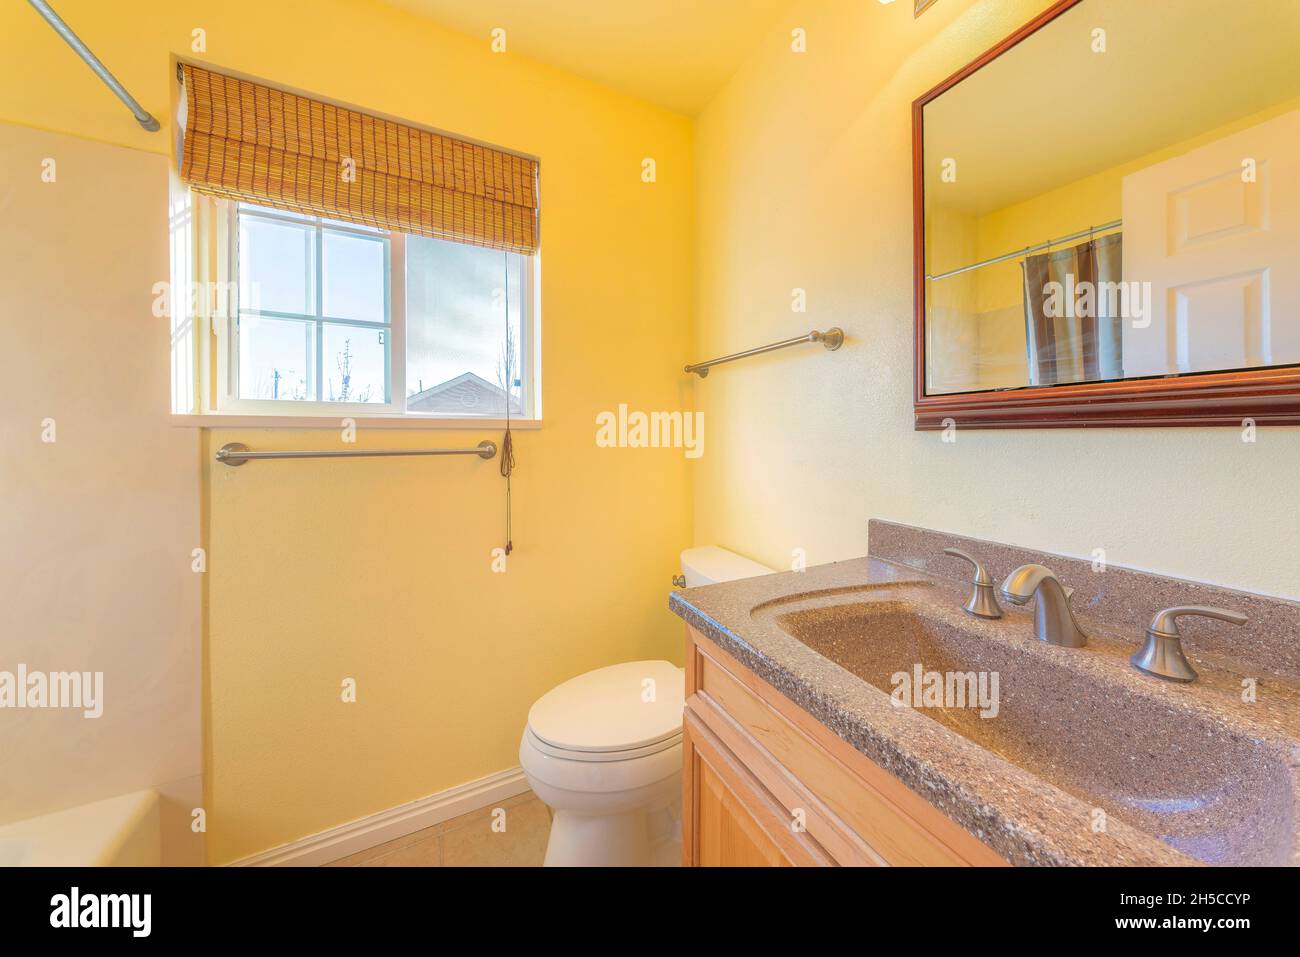 Small yellow bathroom interior with bamboo curtain on the window Stock Photo